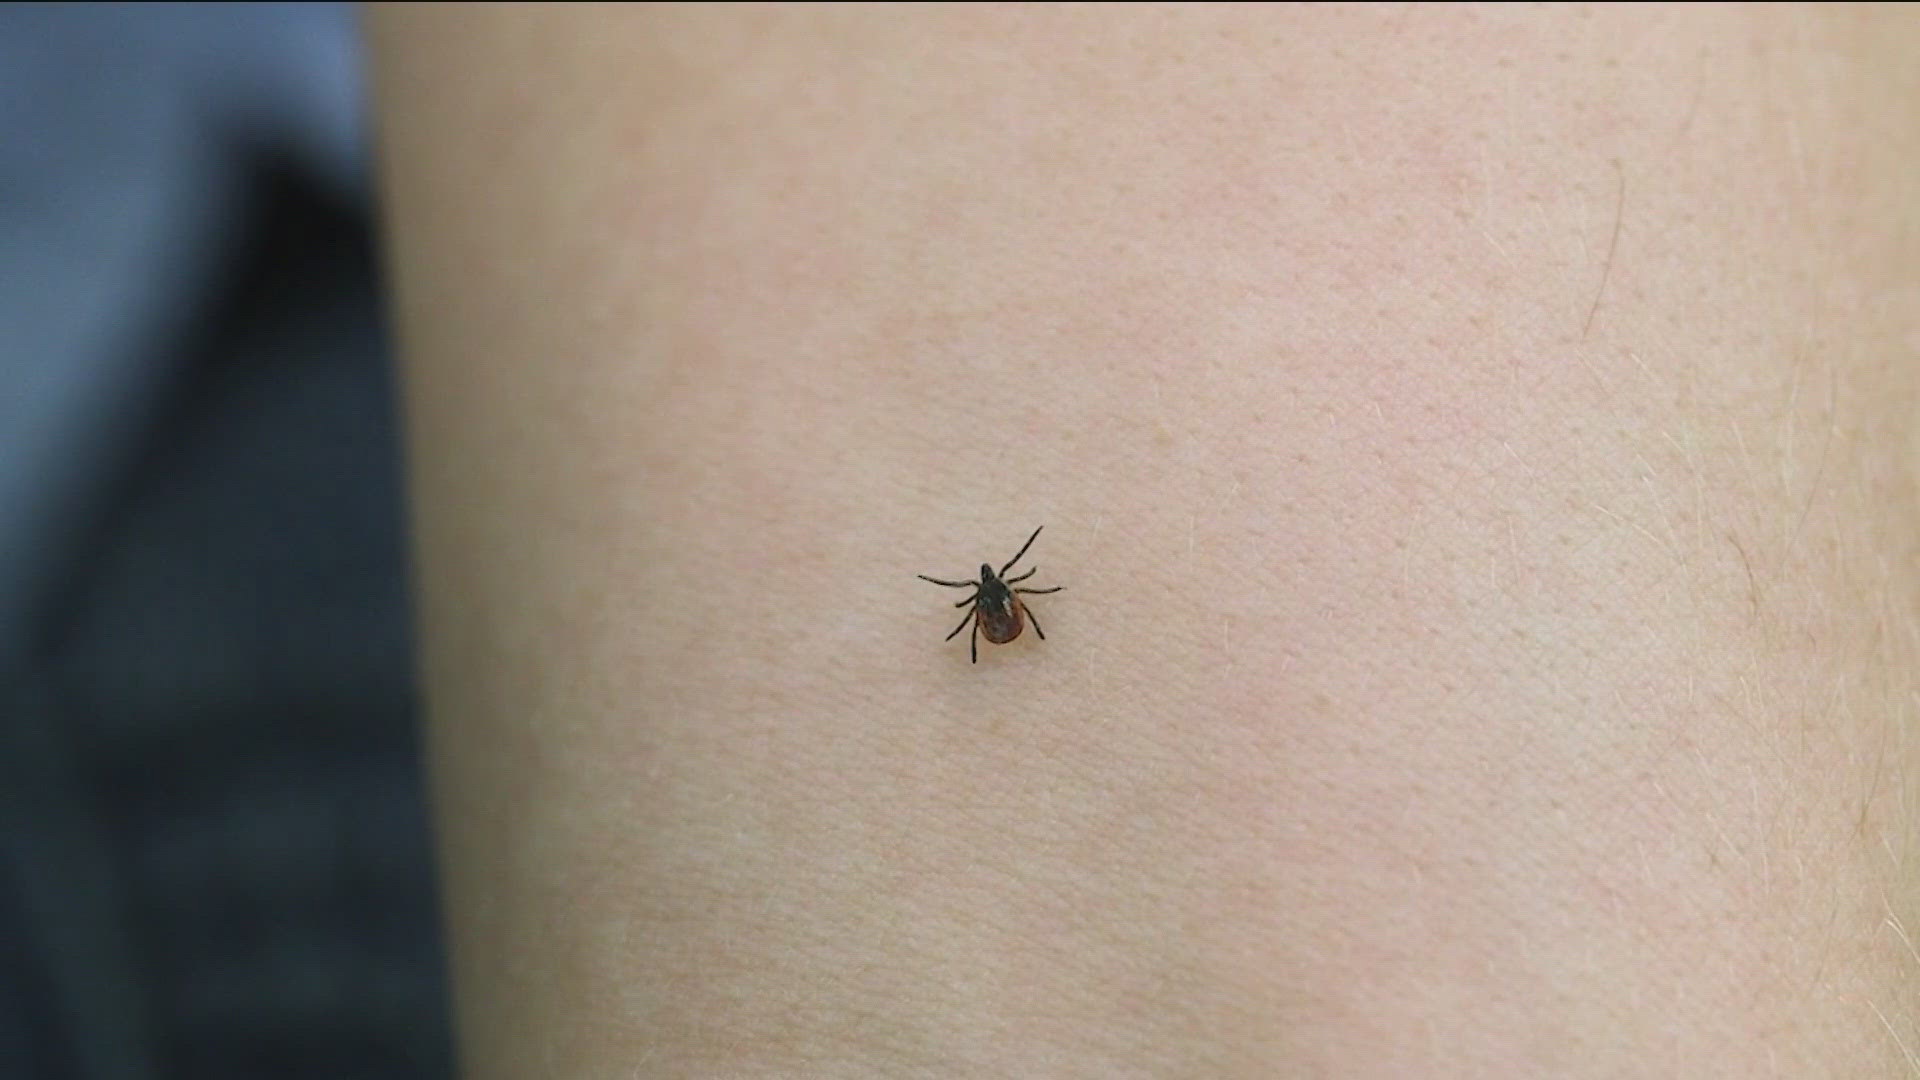 As the weather warms up, Consumer Reports shares tips to limit the number of ticks in your outdoor space.